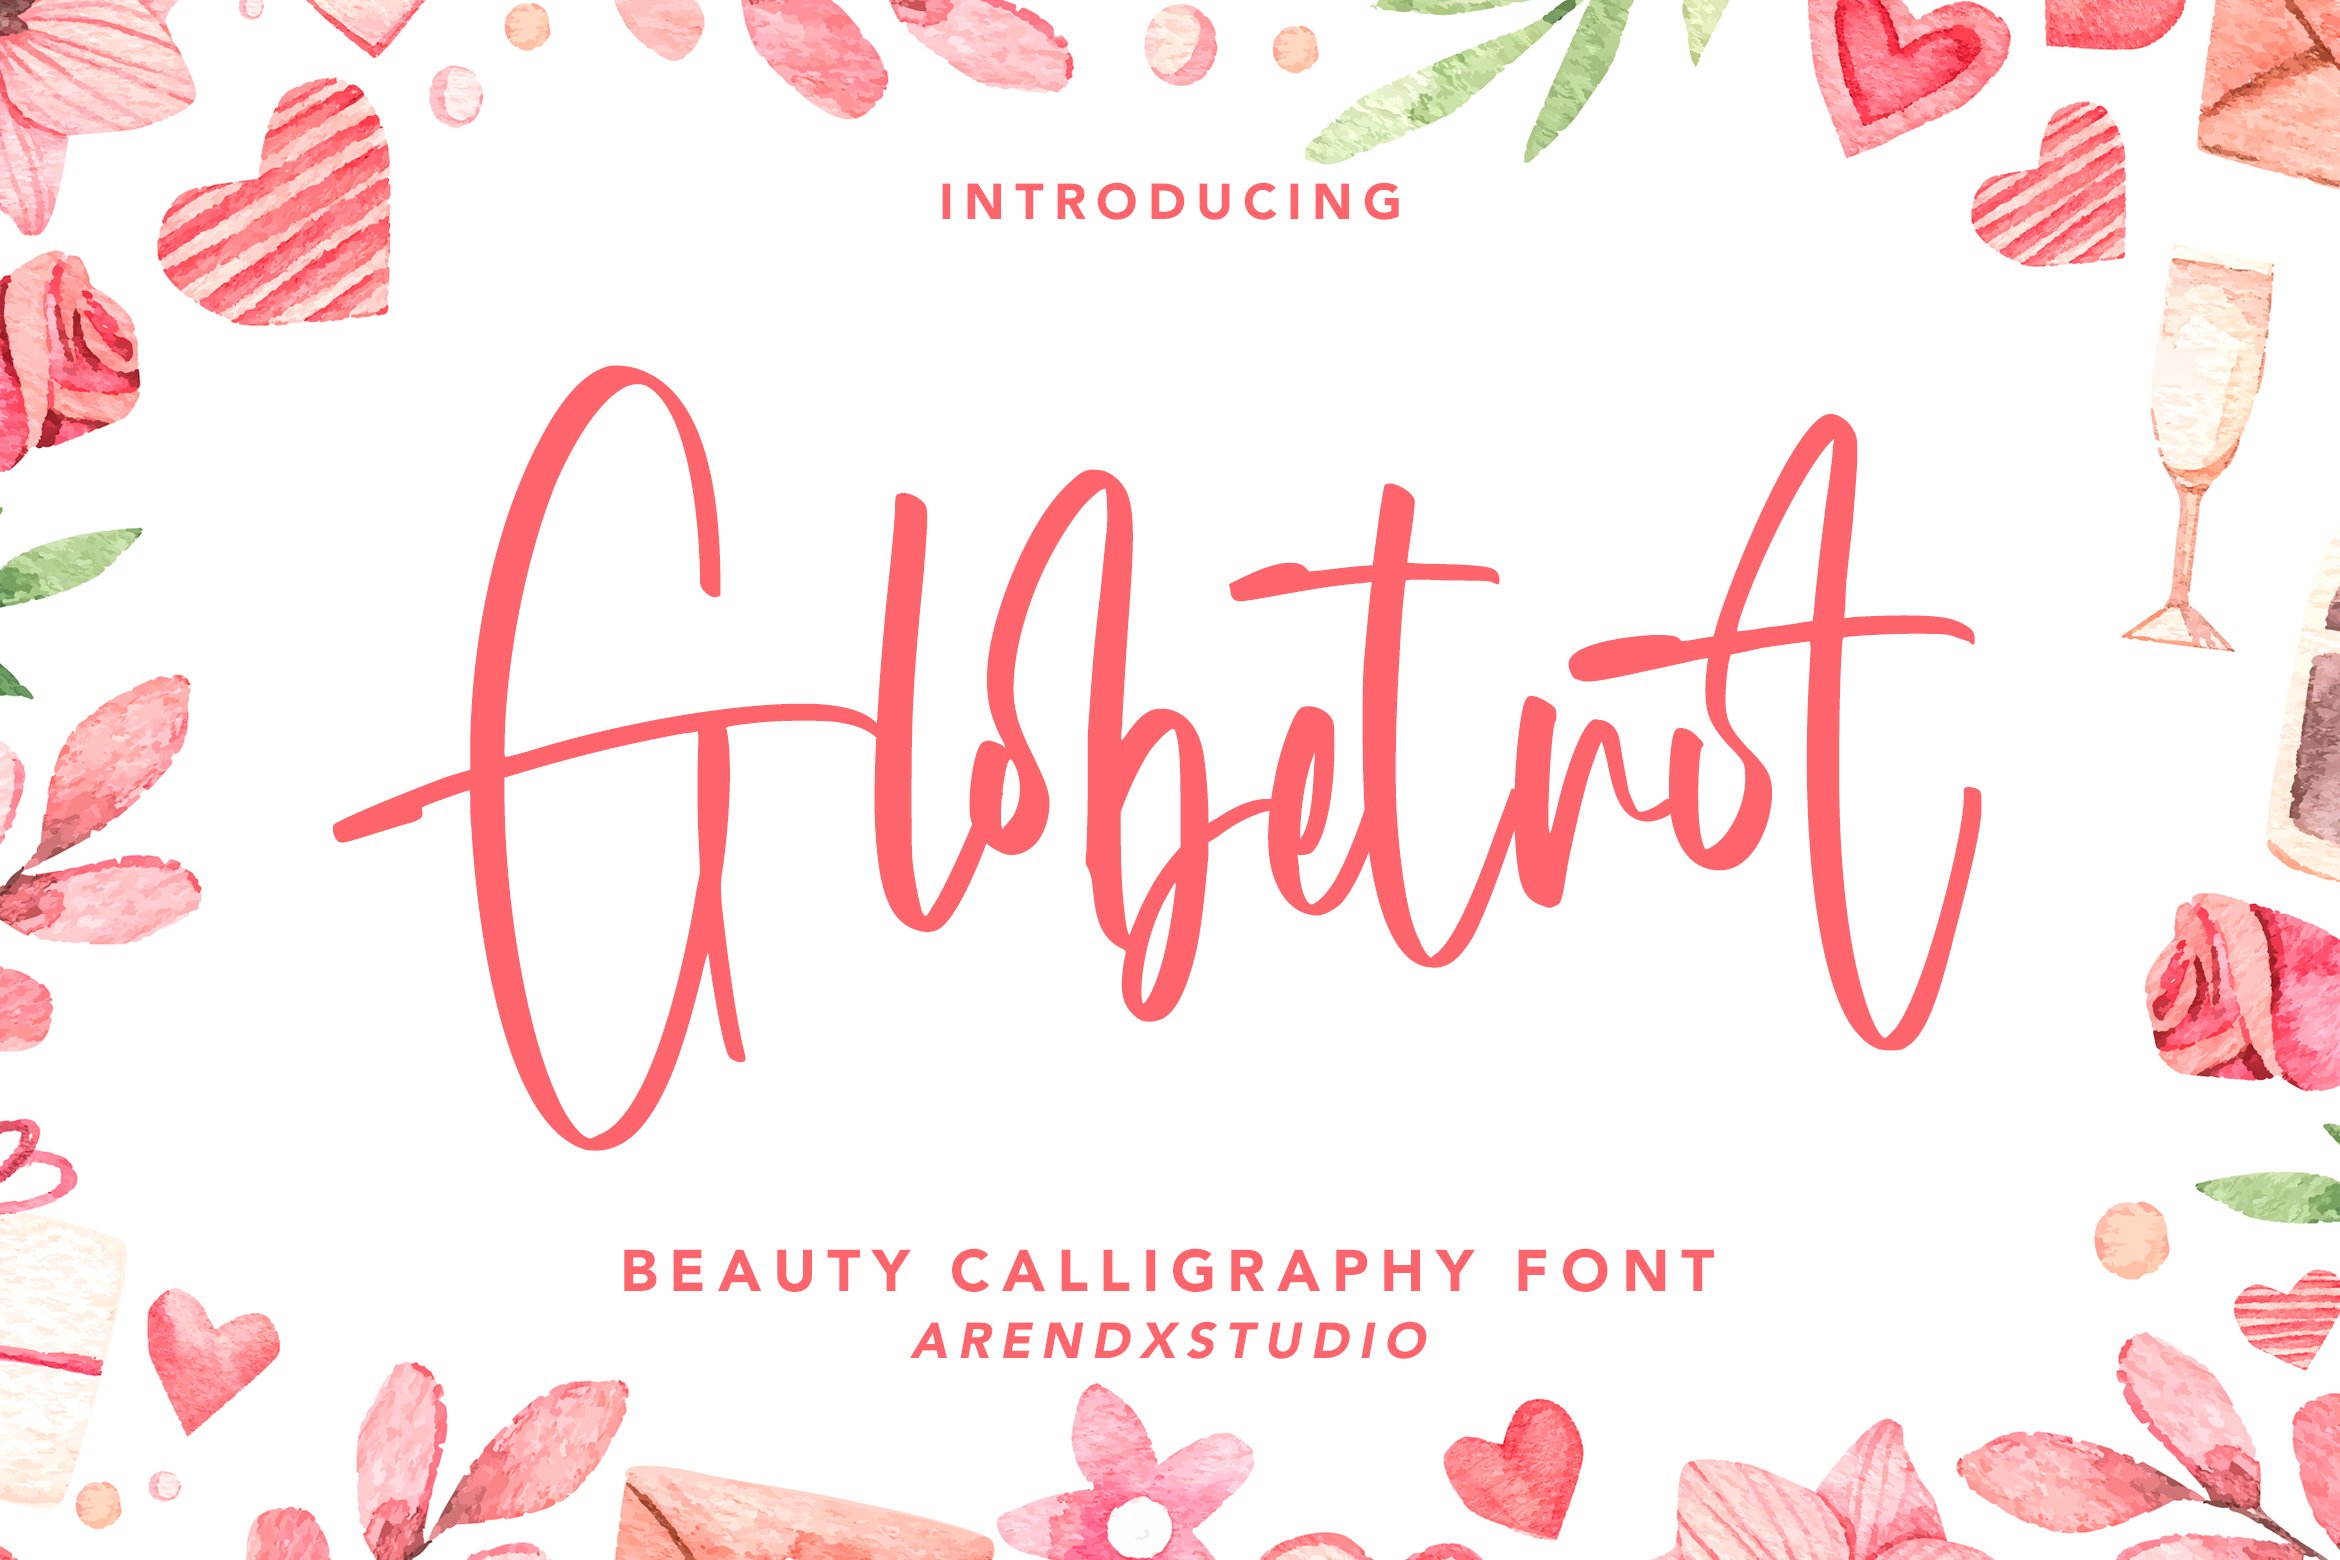 Globetrot - Beauty Calligraphy Font cover image.